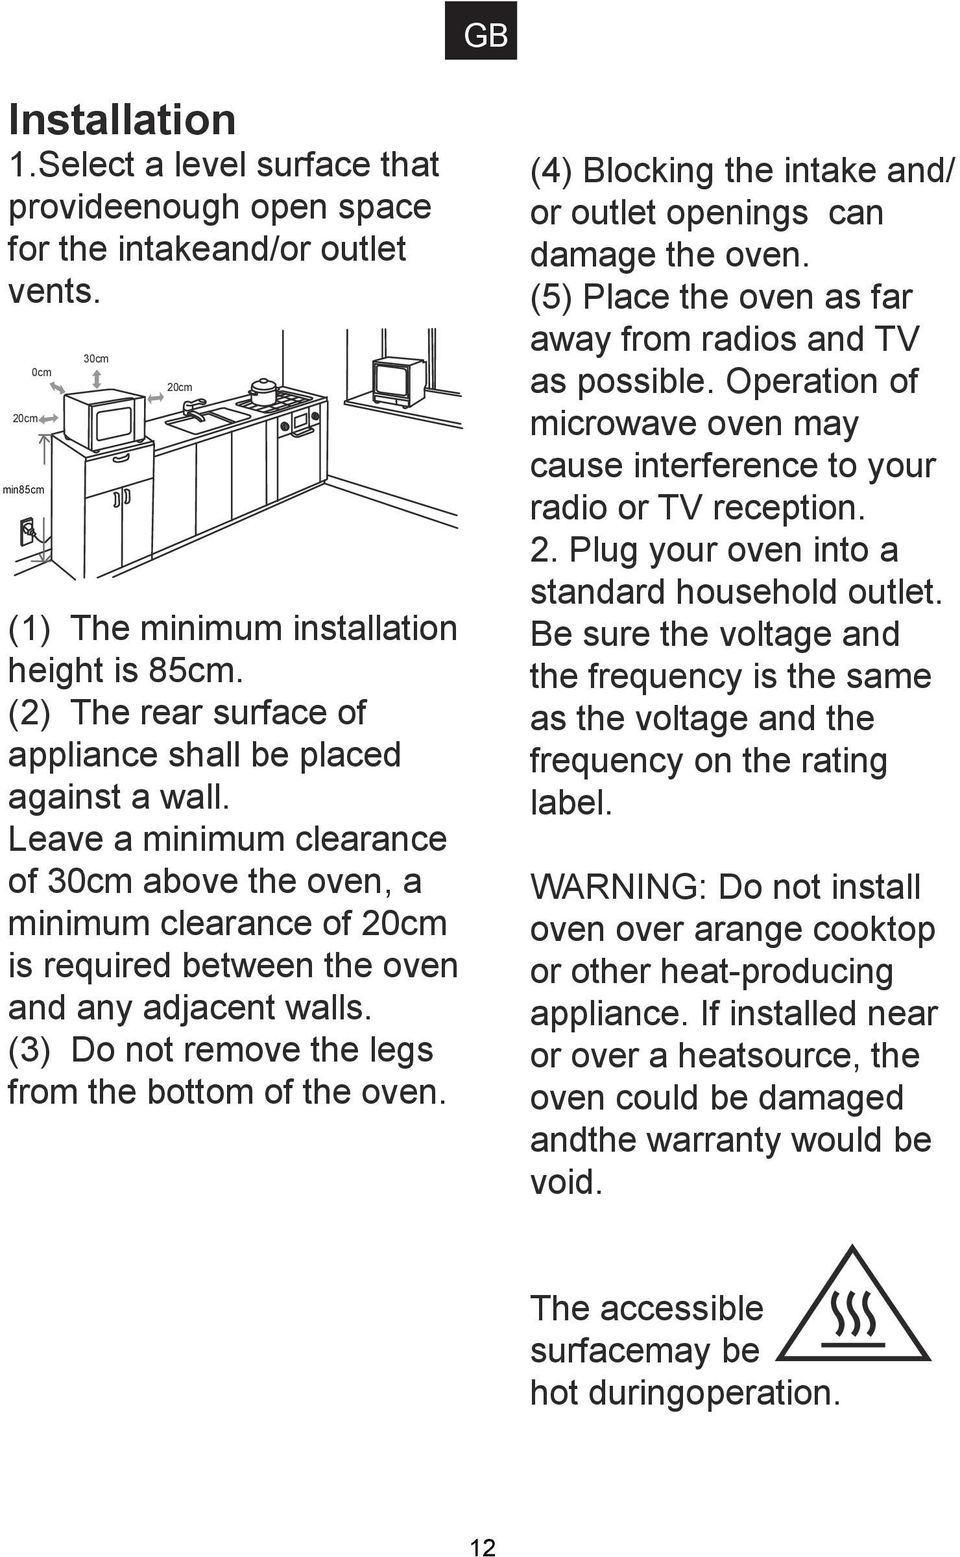 (3) Do not remove the legs from the bottom of the oven. (4) Blocking the intake and/ or outlet openings can damage the oven. (5) Place the oven as far away from radios and TV as possible.